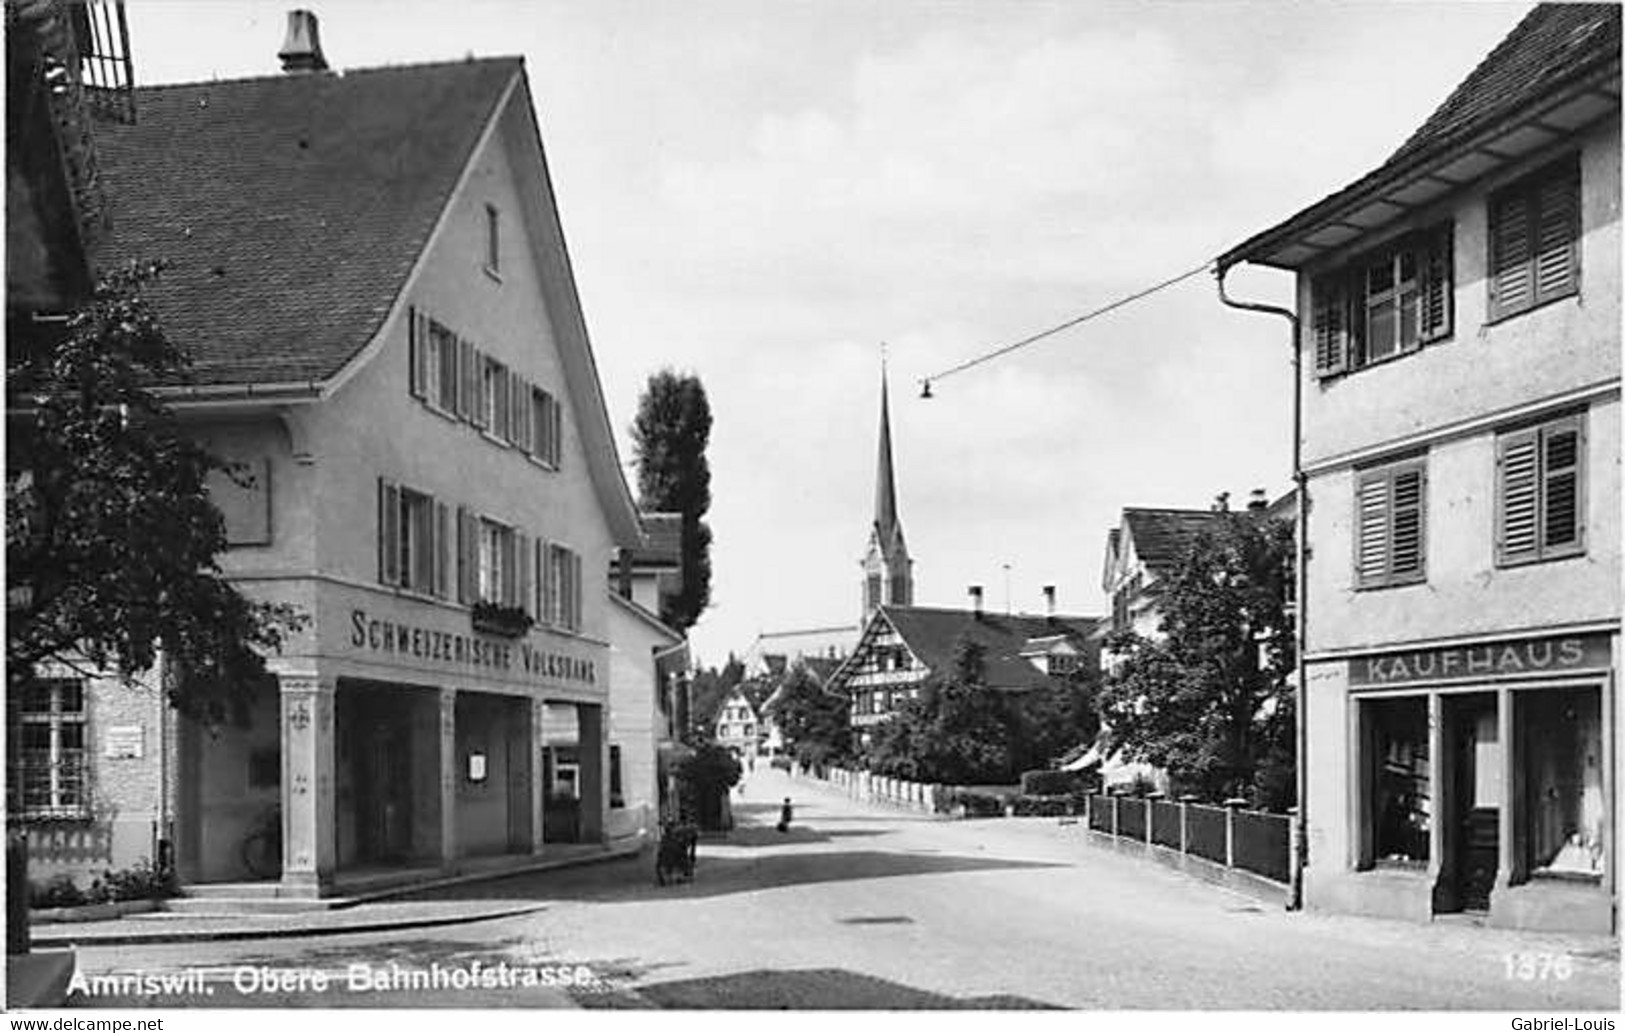 Amriswil Obere Bahnhofstrasse - Amriswil